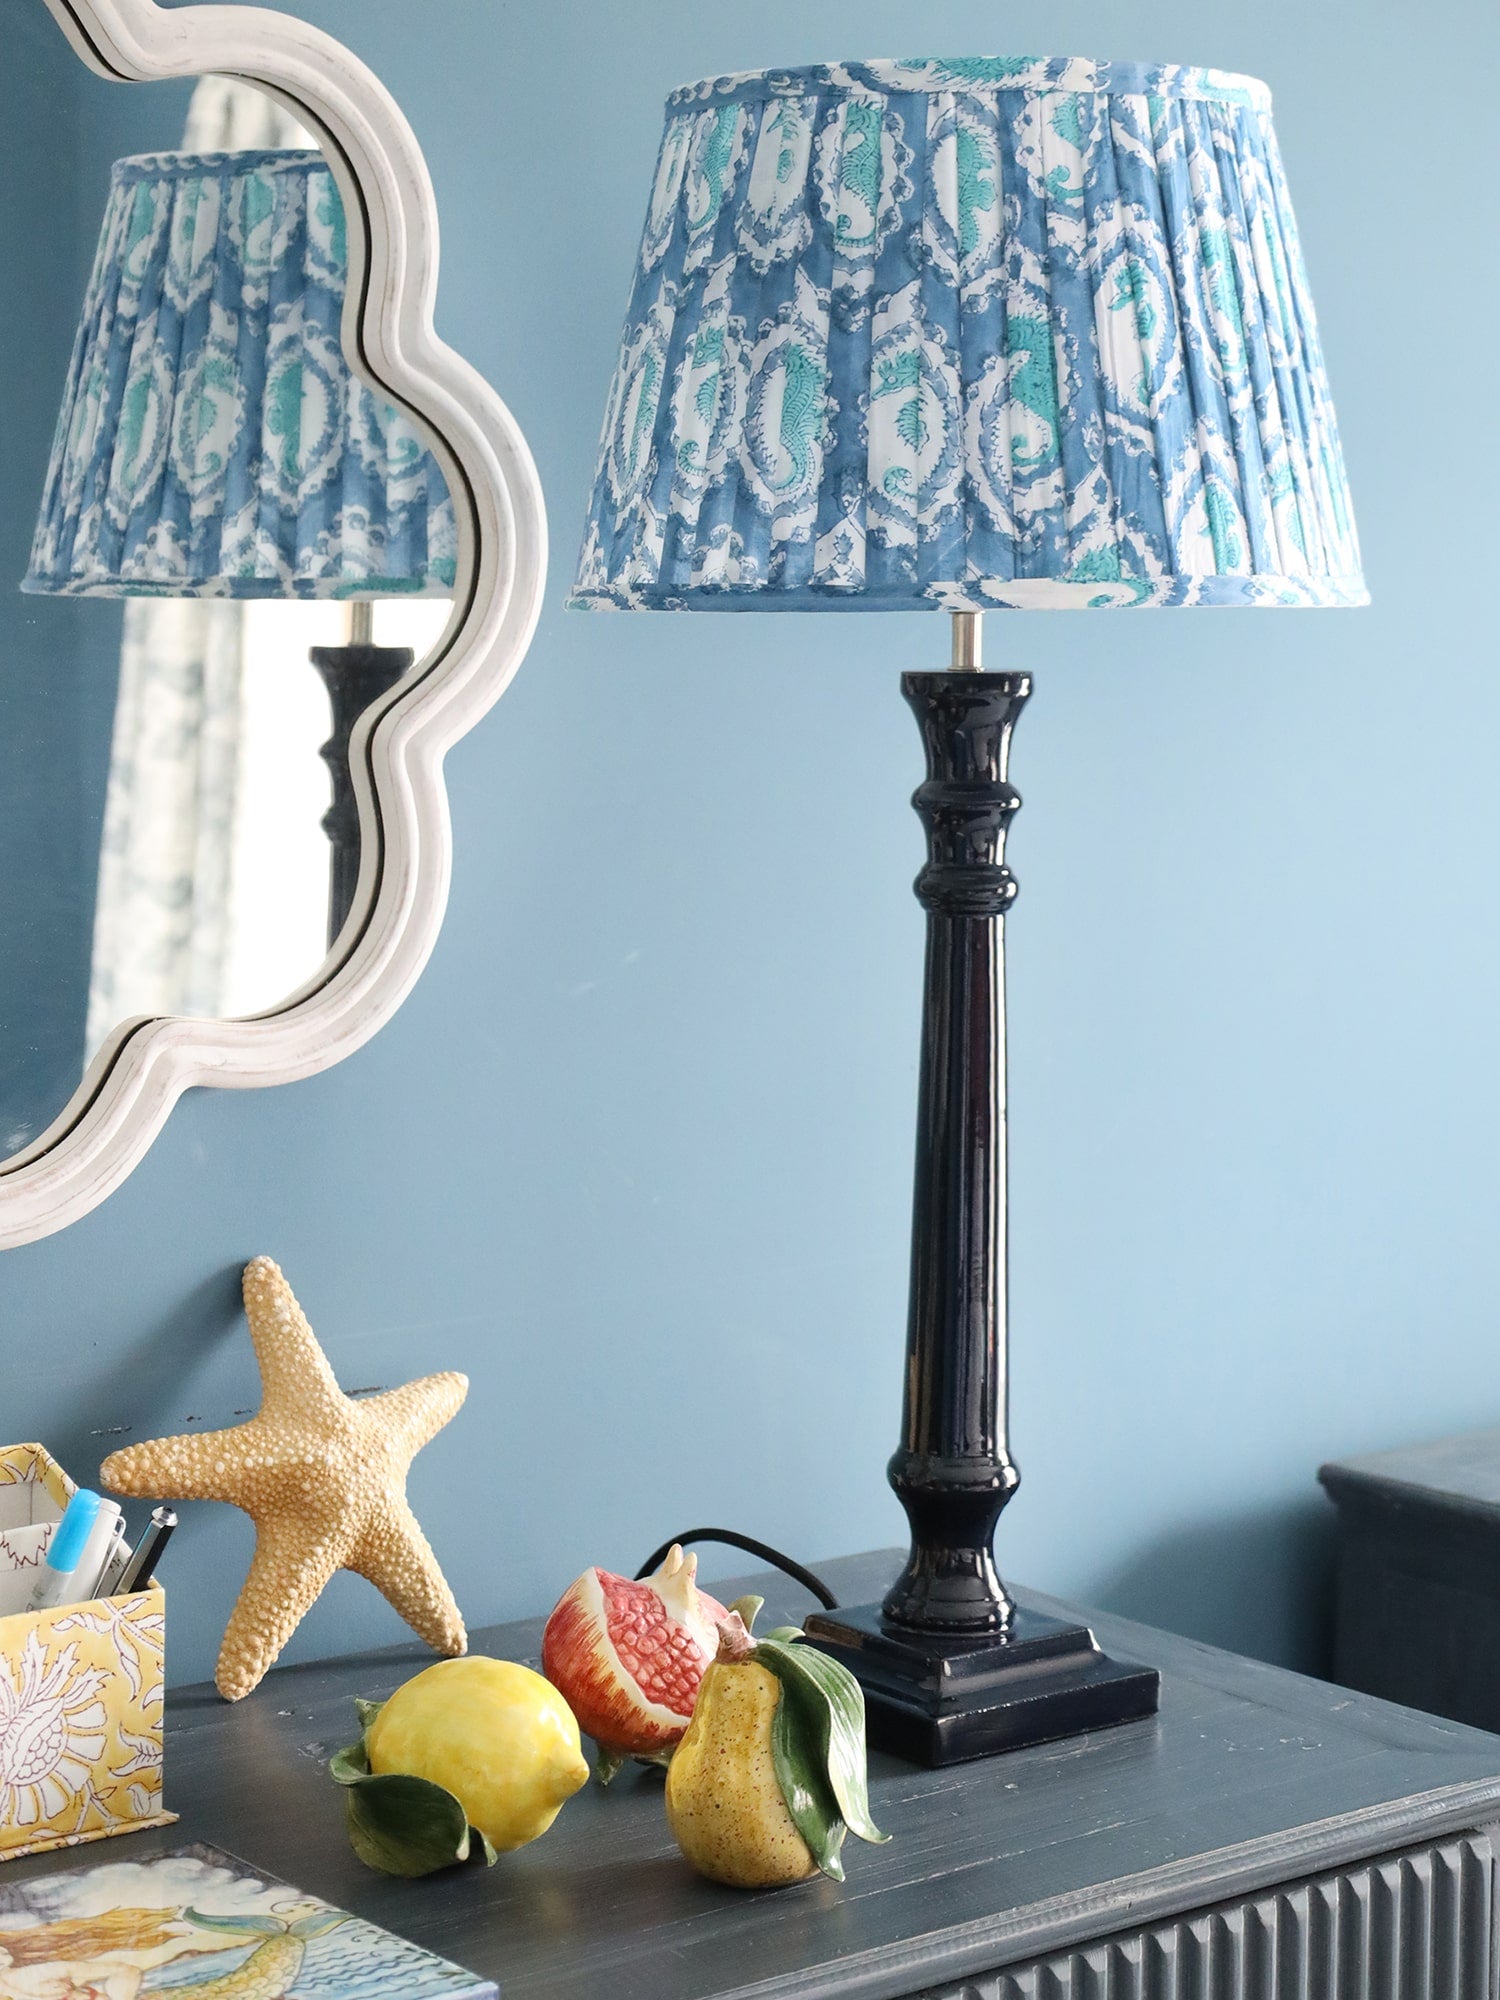 Large Azure paisley pleated lampshade on our Navy lampbase placed on a sideboard.On the sideboard are ceramic fruits and a starfish,in the background is a white wave mirror.